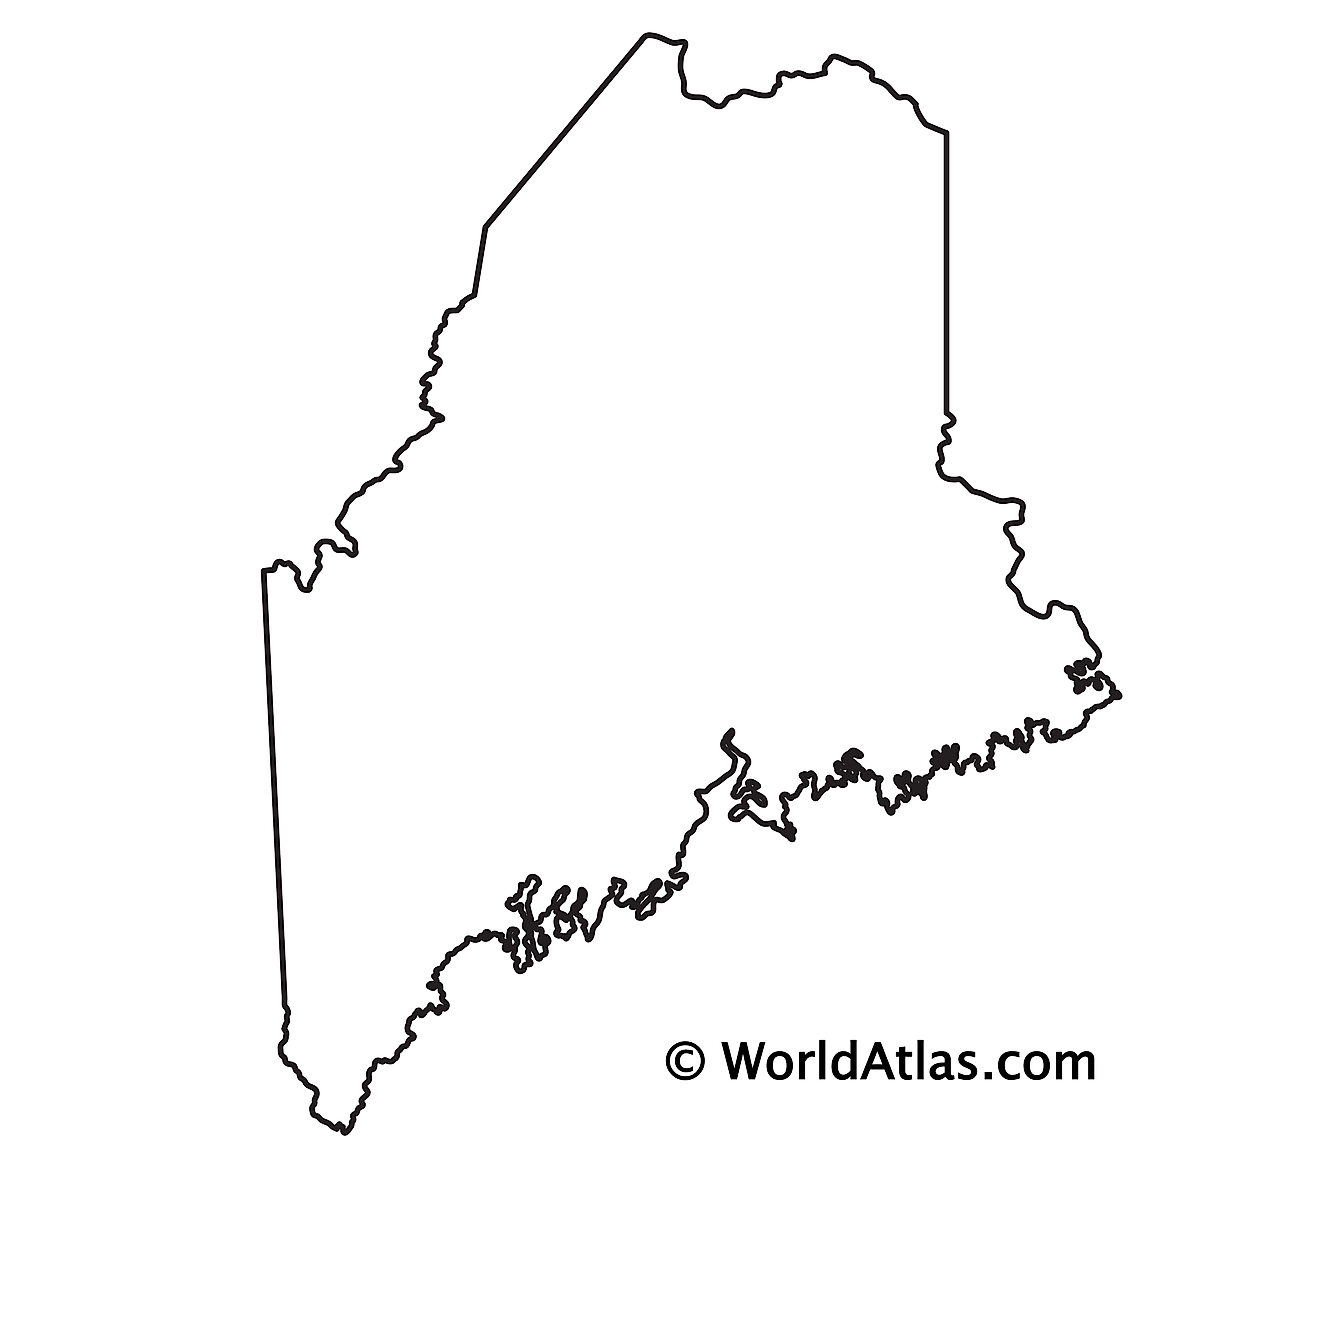 Blank Outline Map of Maine